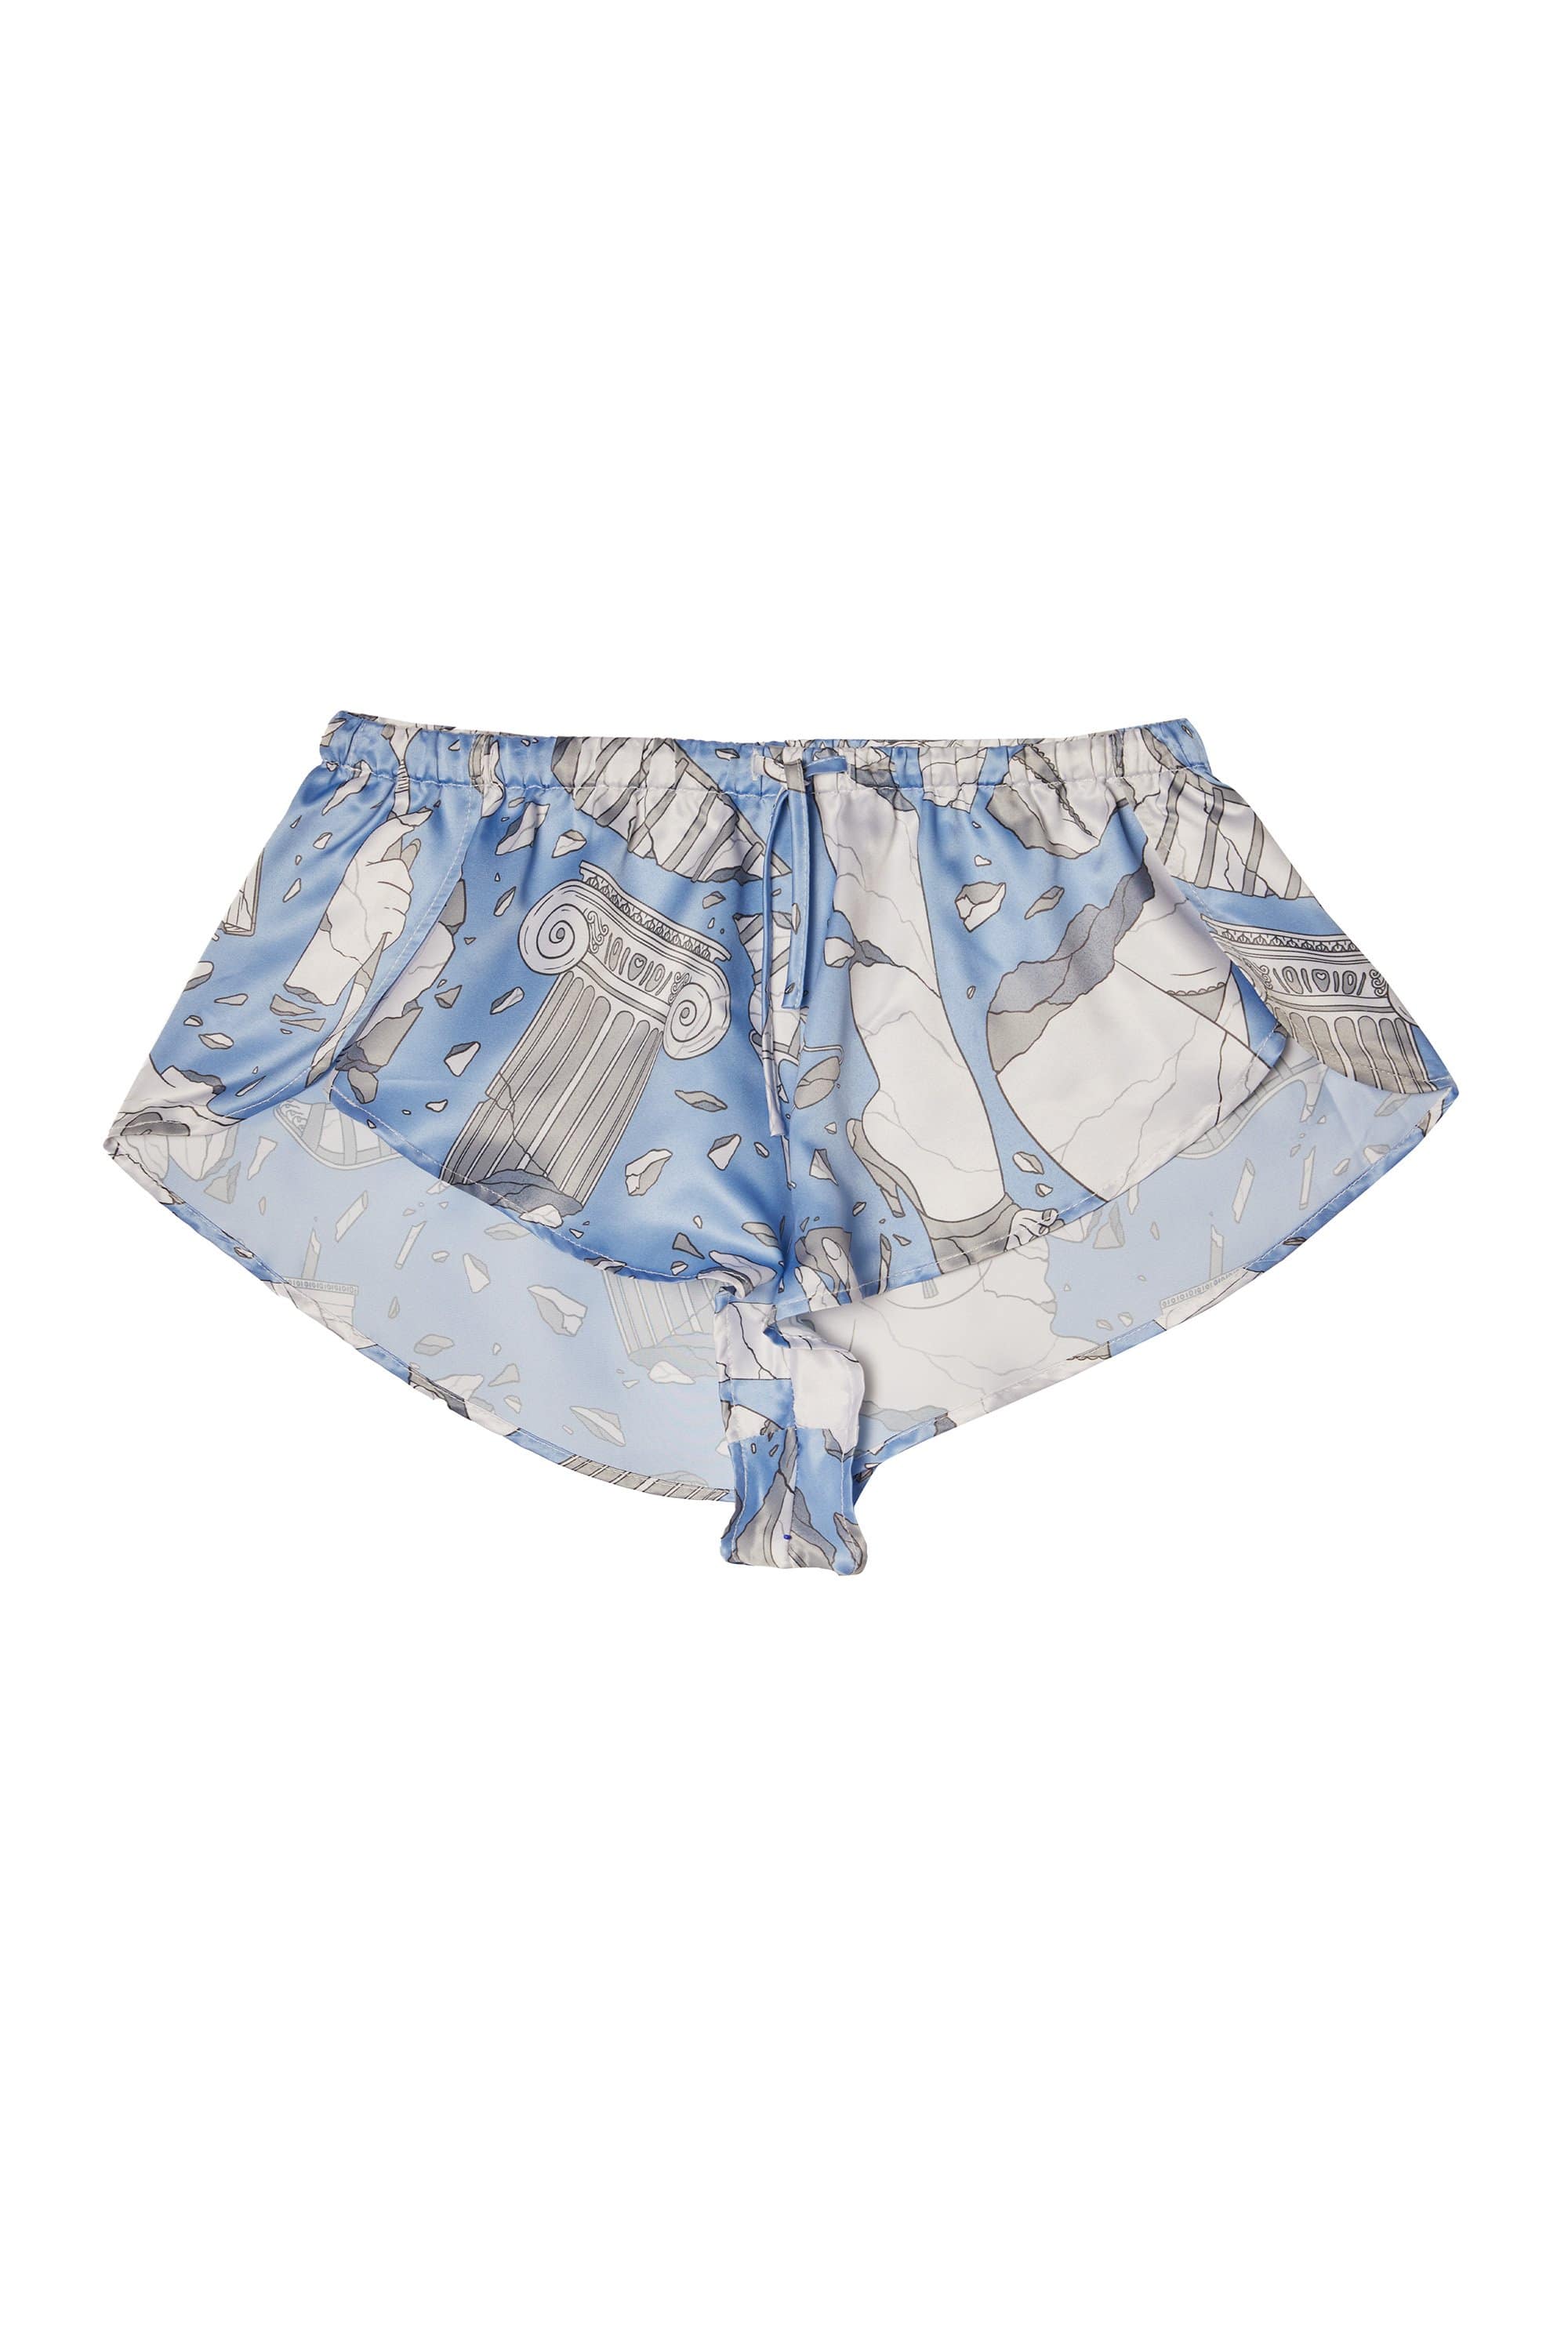 Logan Spector Recycled Blue Statues Satin Shorts